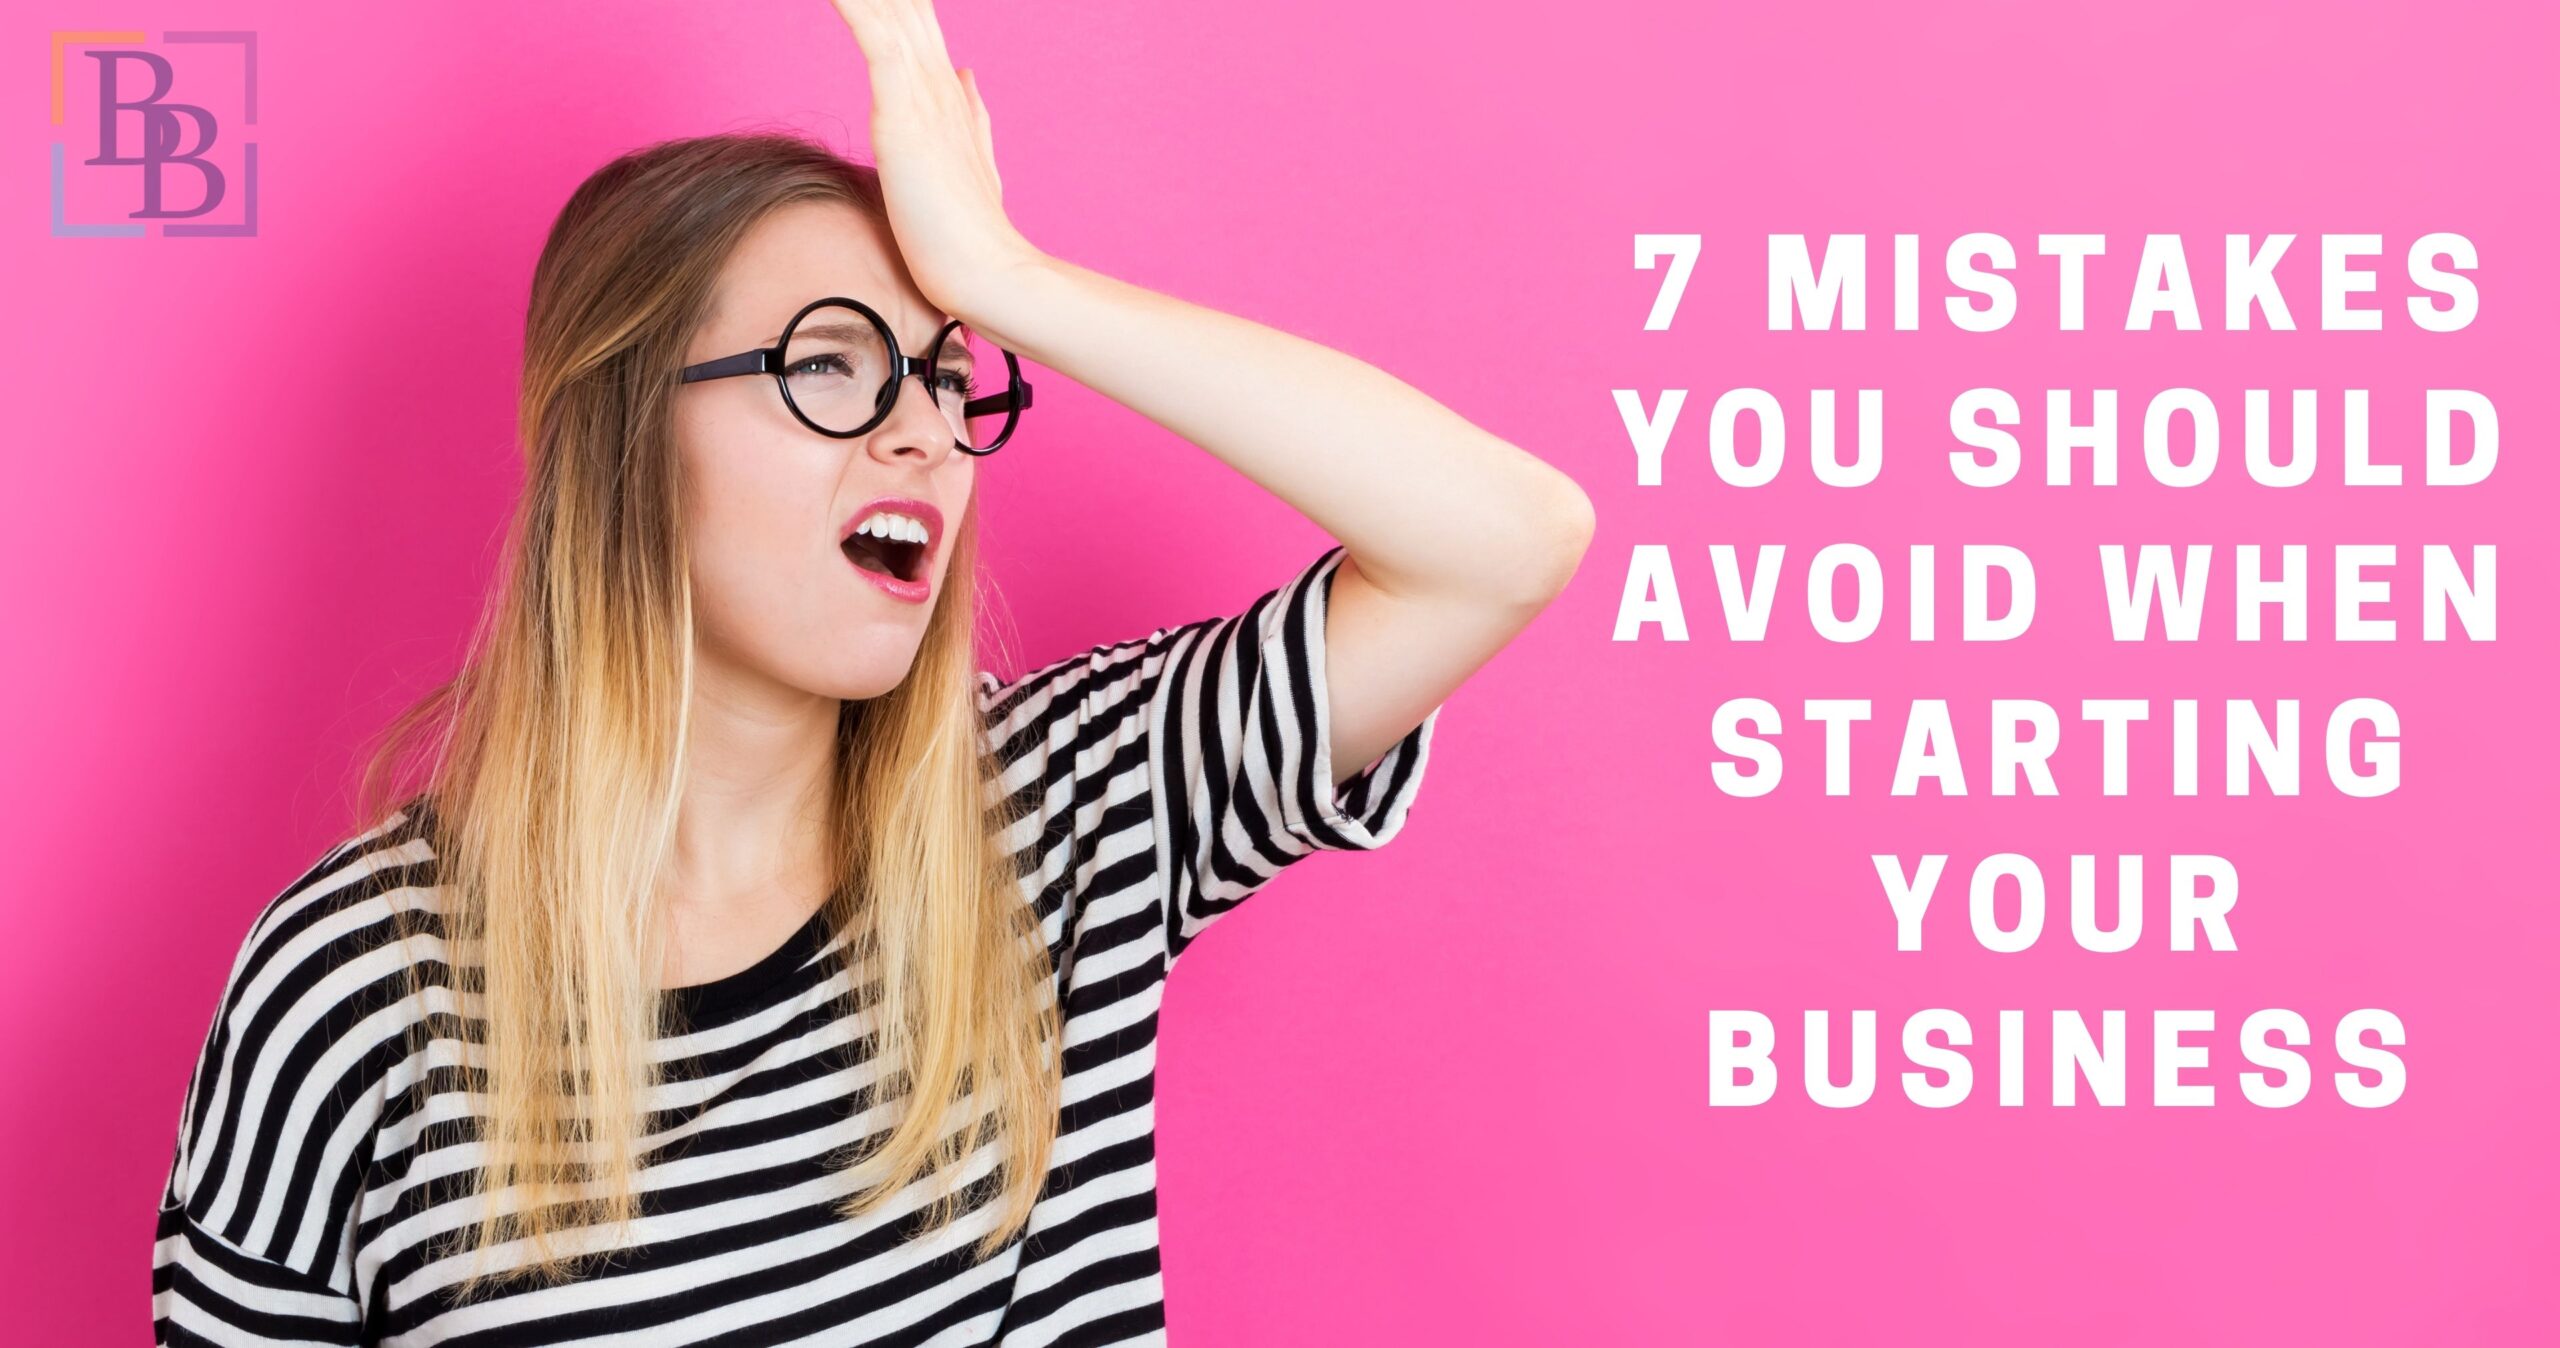 Mistakes you should avoid if you are starting your own business